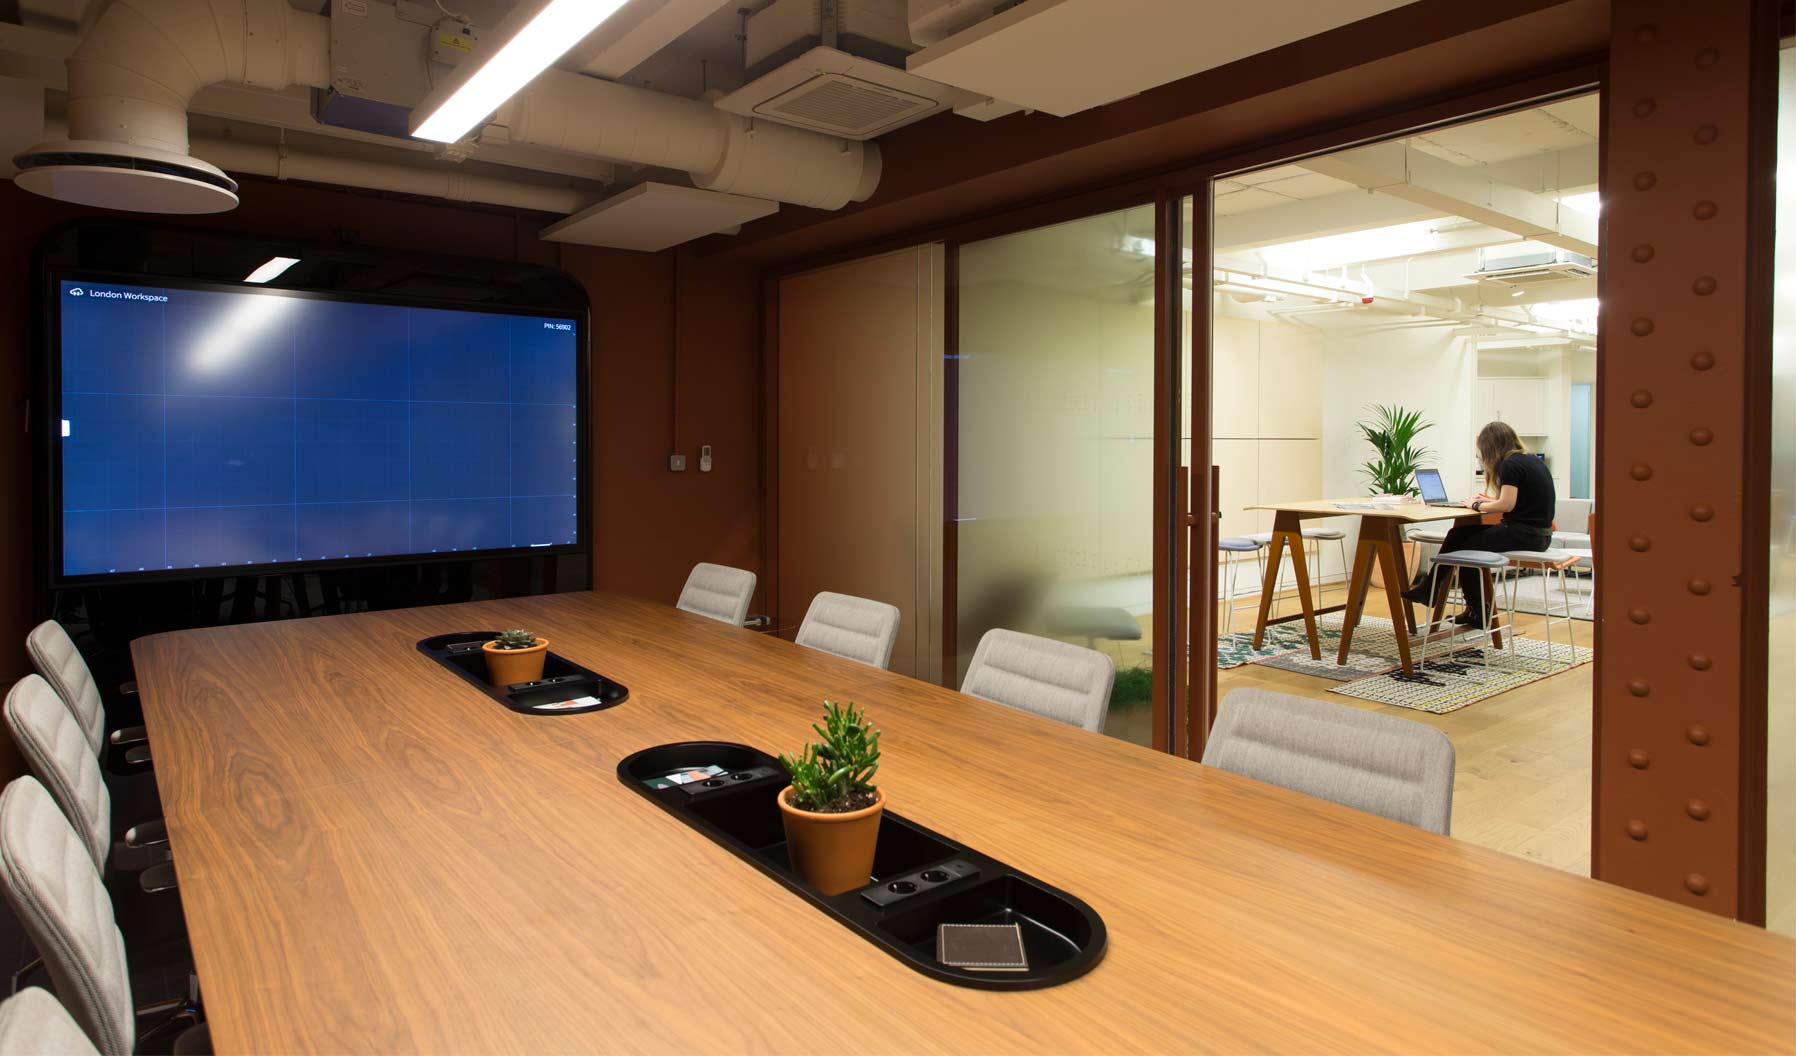 An Immerse conference table with Bluescape collaborative technology in the London showroom.